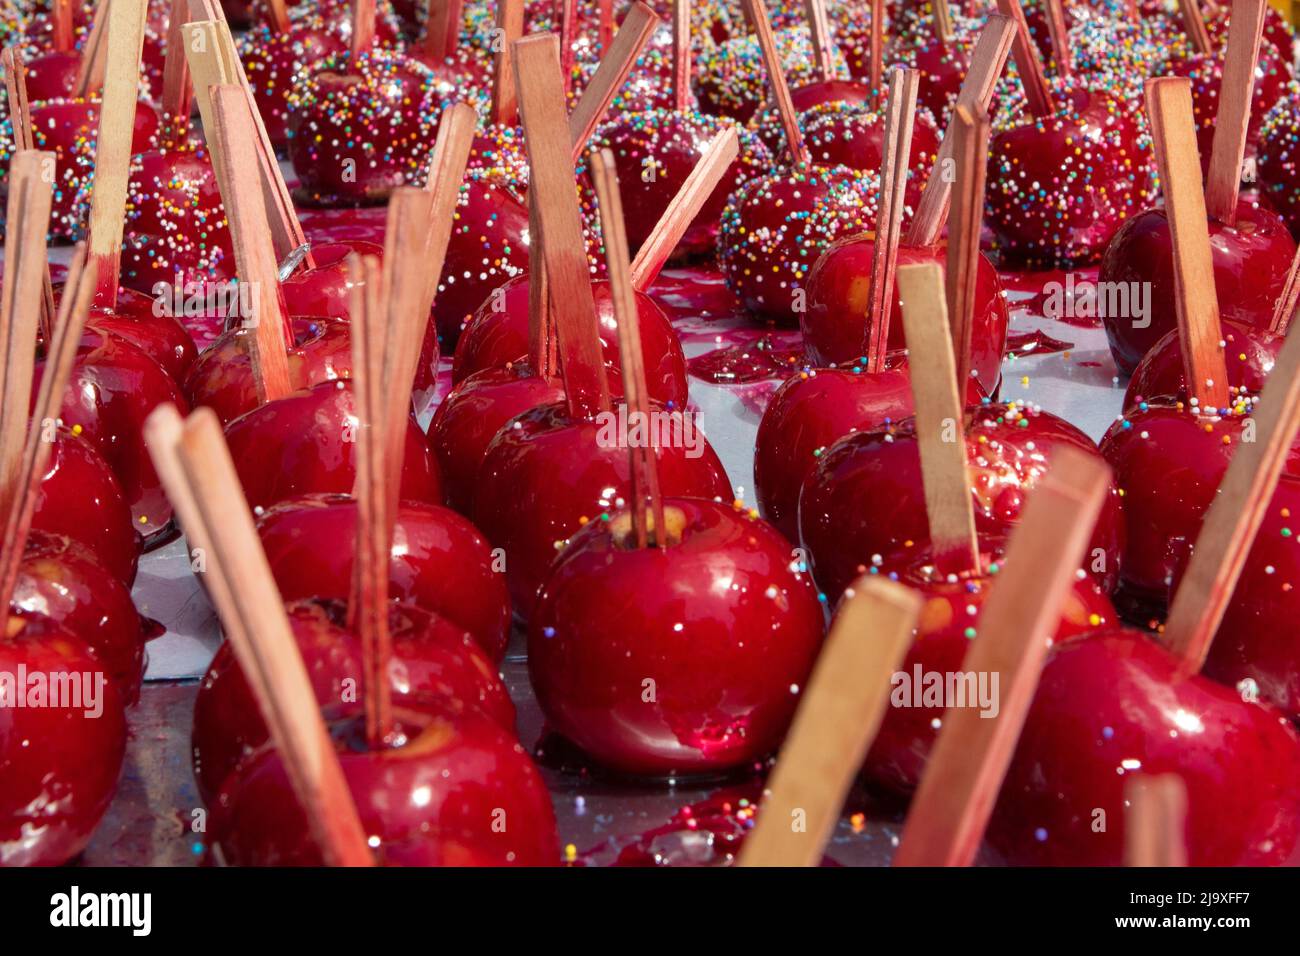 Toffee apples or candy apples, also known as 'maçãs do amor' in Brazil, treat traditionally served during the festivities of Círio de Nazaré in Belém Stock Photo